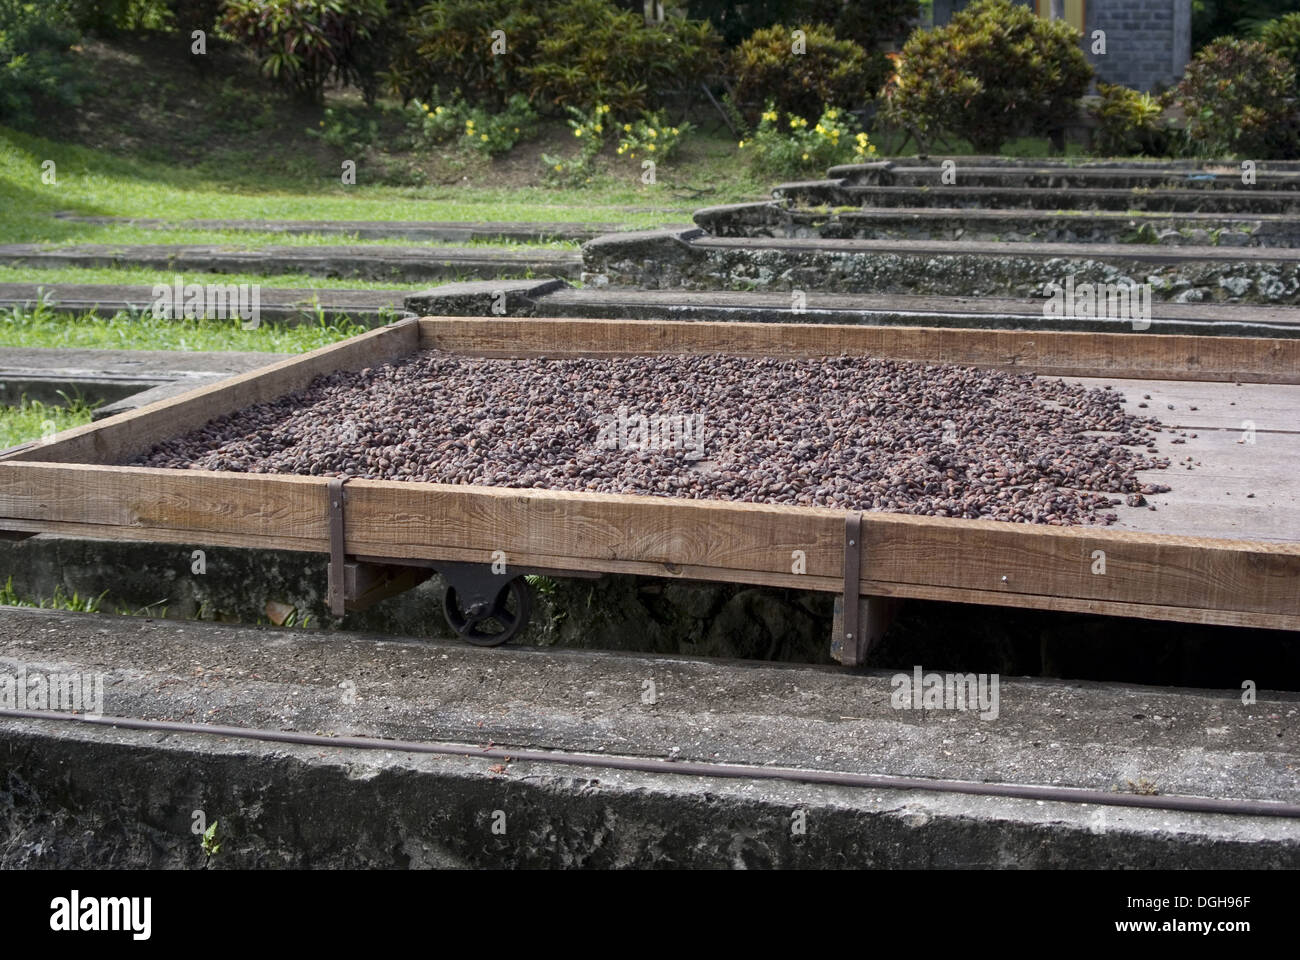 Cocoa (Theobroma cacao) crop fermented beans drying naturally on plantation Belmont Estate Grenada Grenadines Windward Islands Stock Photo